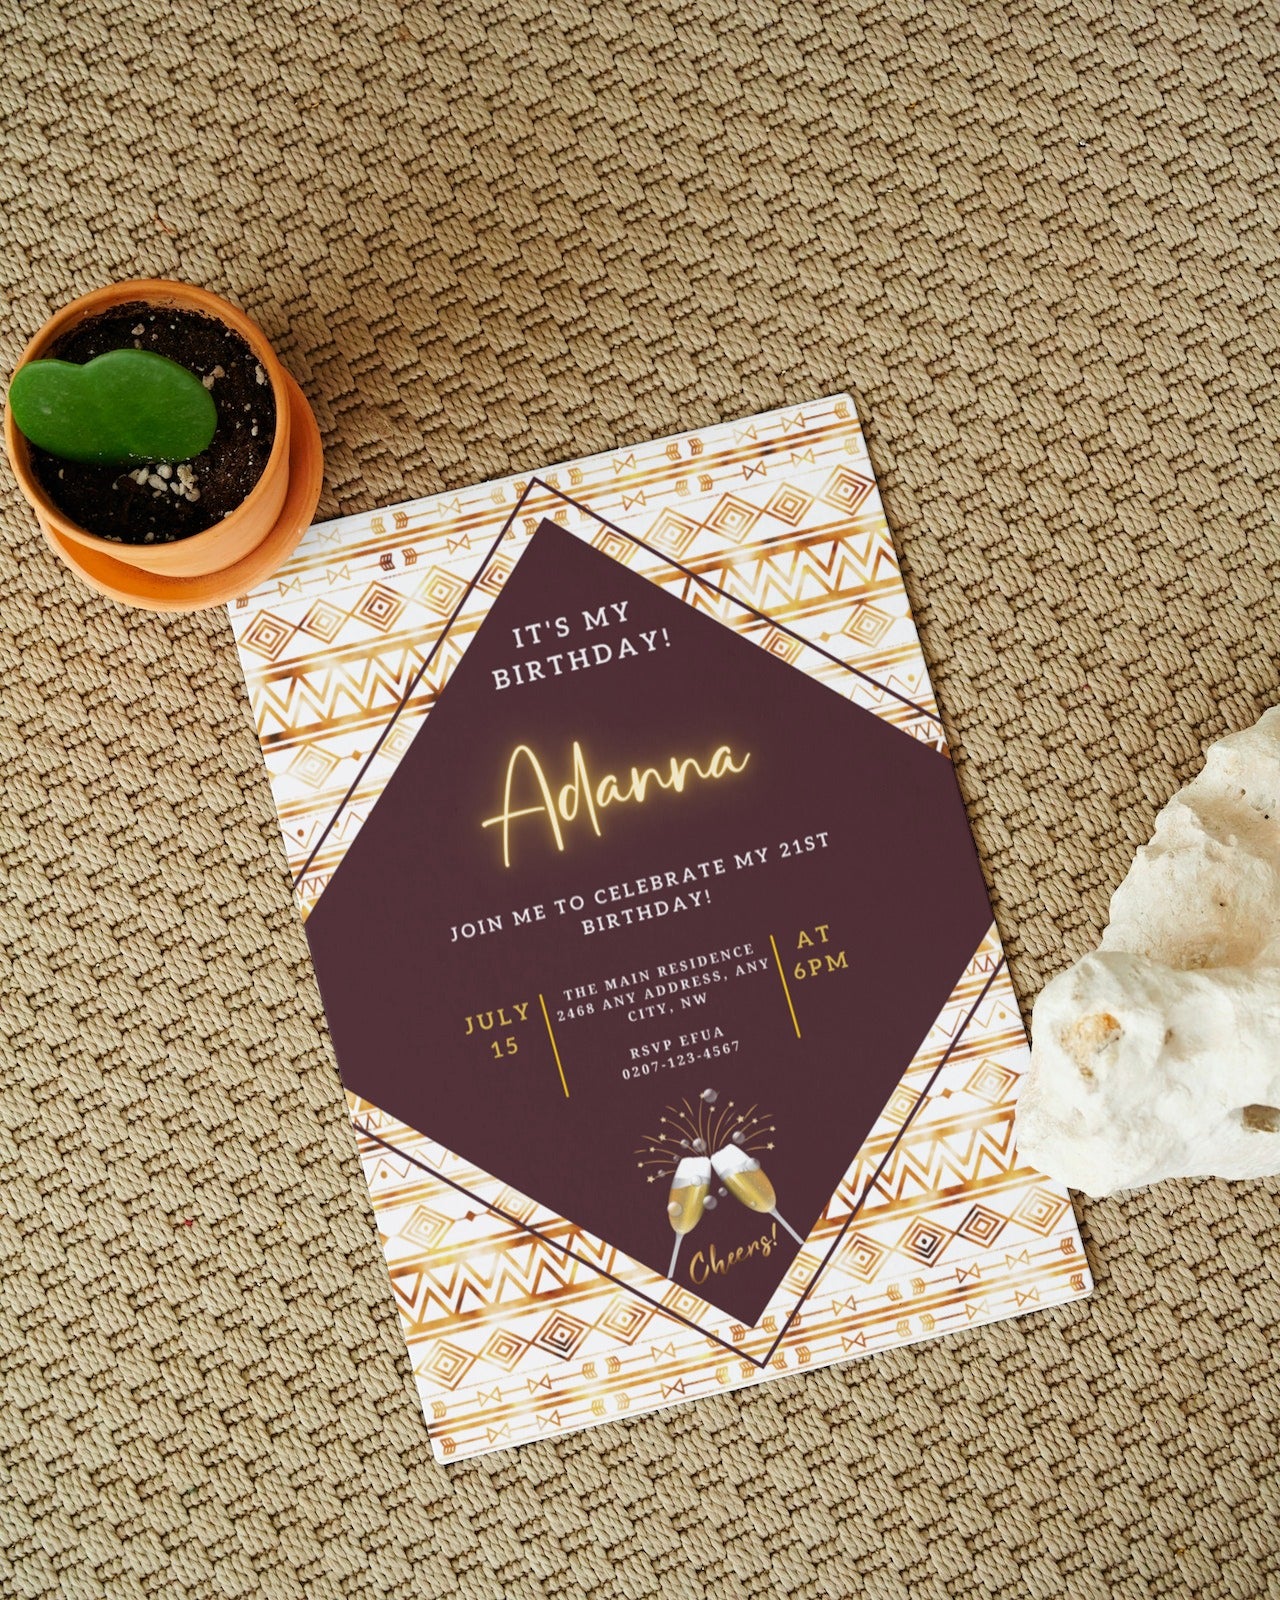 Editable Beige White African Ankara Party Evite and a small potted cactus on a carpet, showcasing a personalized digital invitation template.